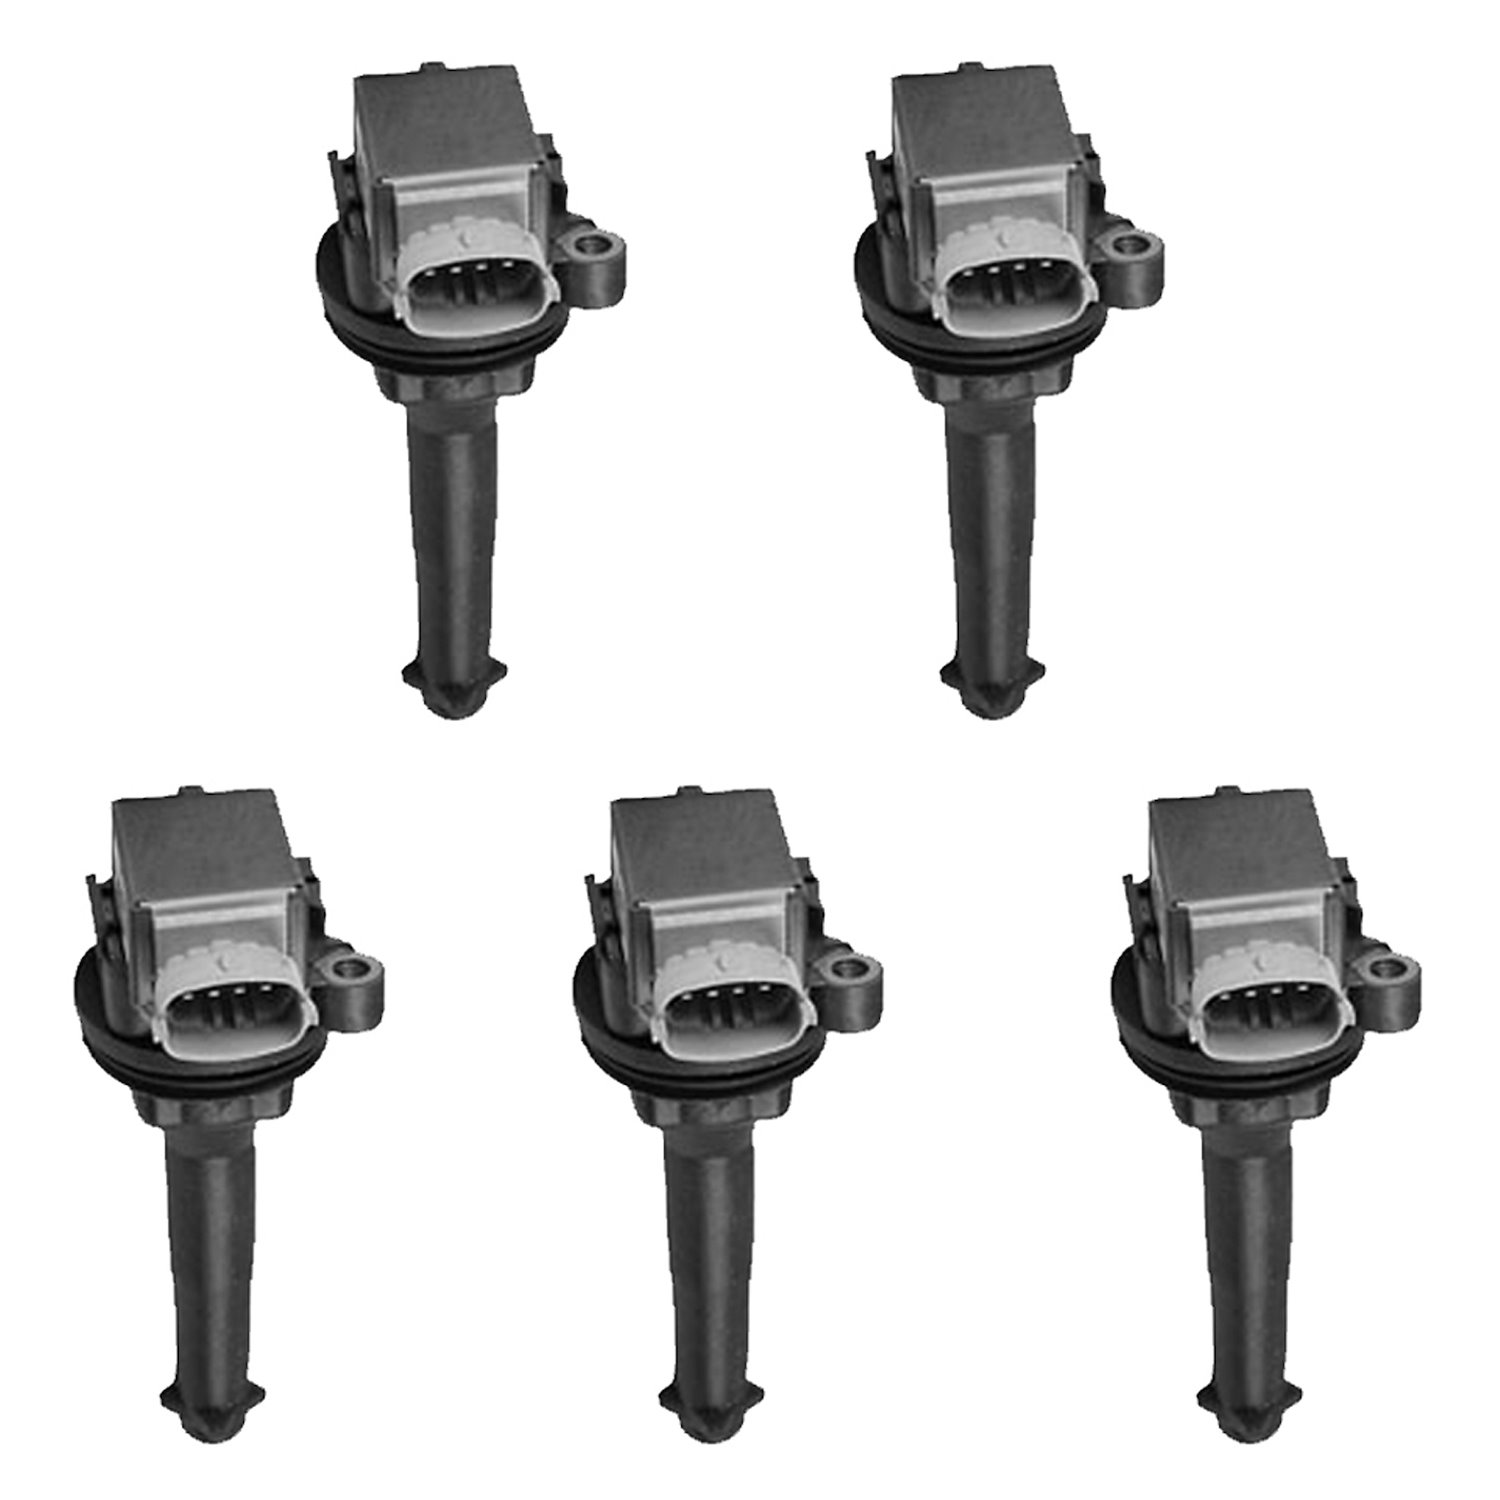 OE Replacement Ignition Coils for 2007-2013 Volvo C30